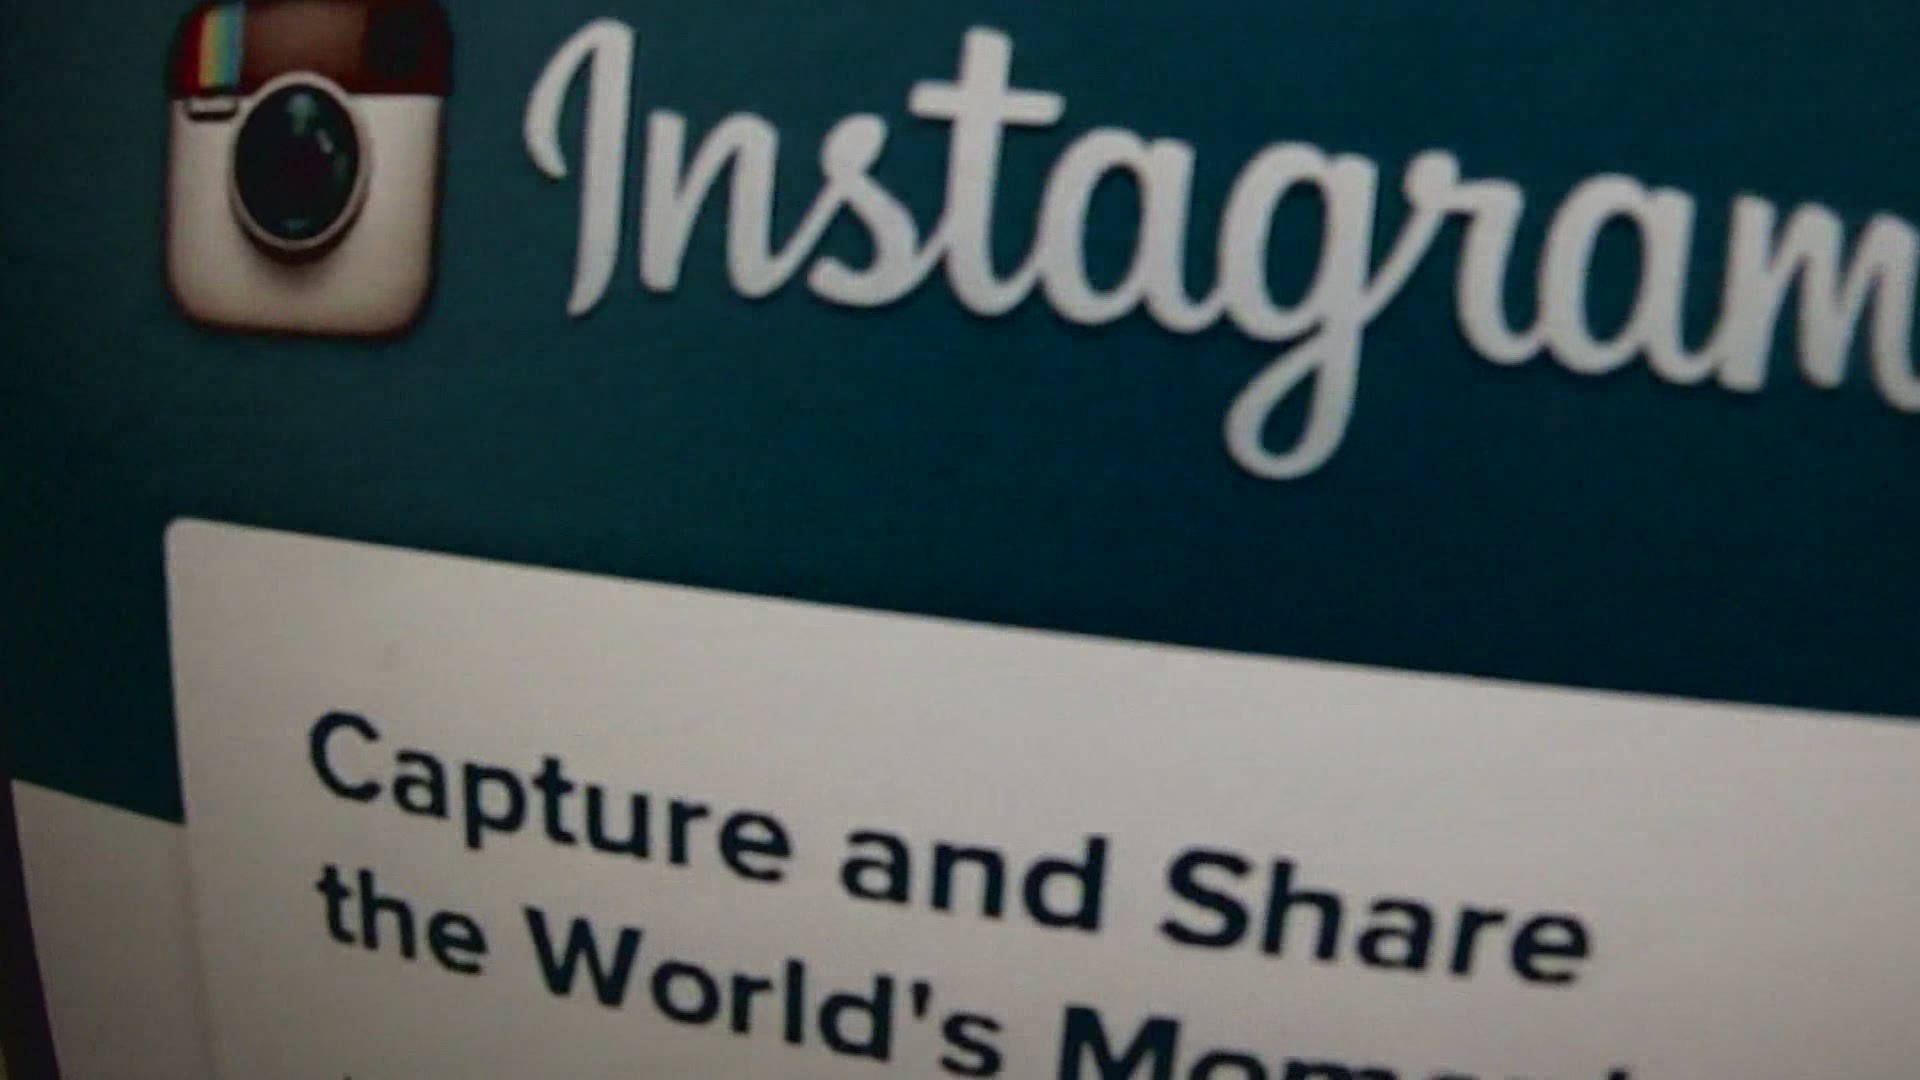 Sex photos of girl sent through Instagram has man facing 2 federal charges wzzm13